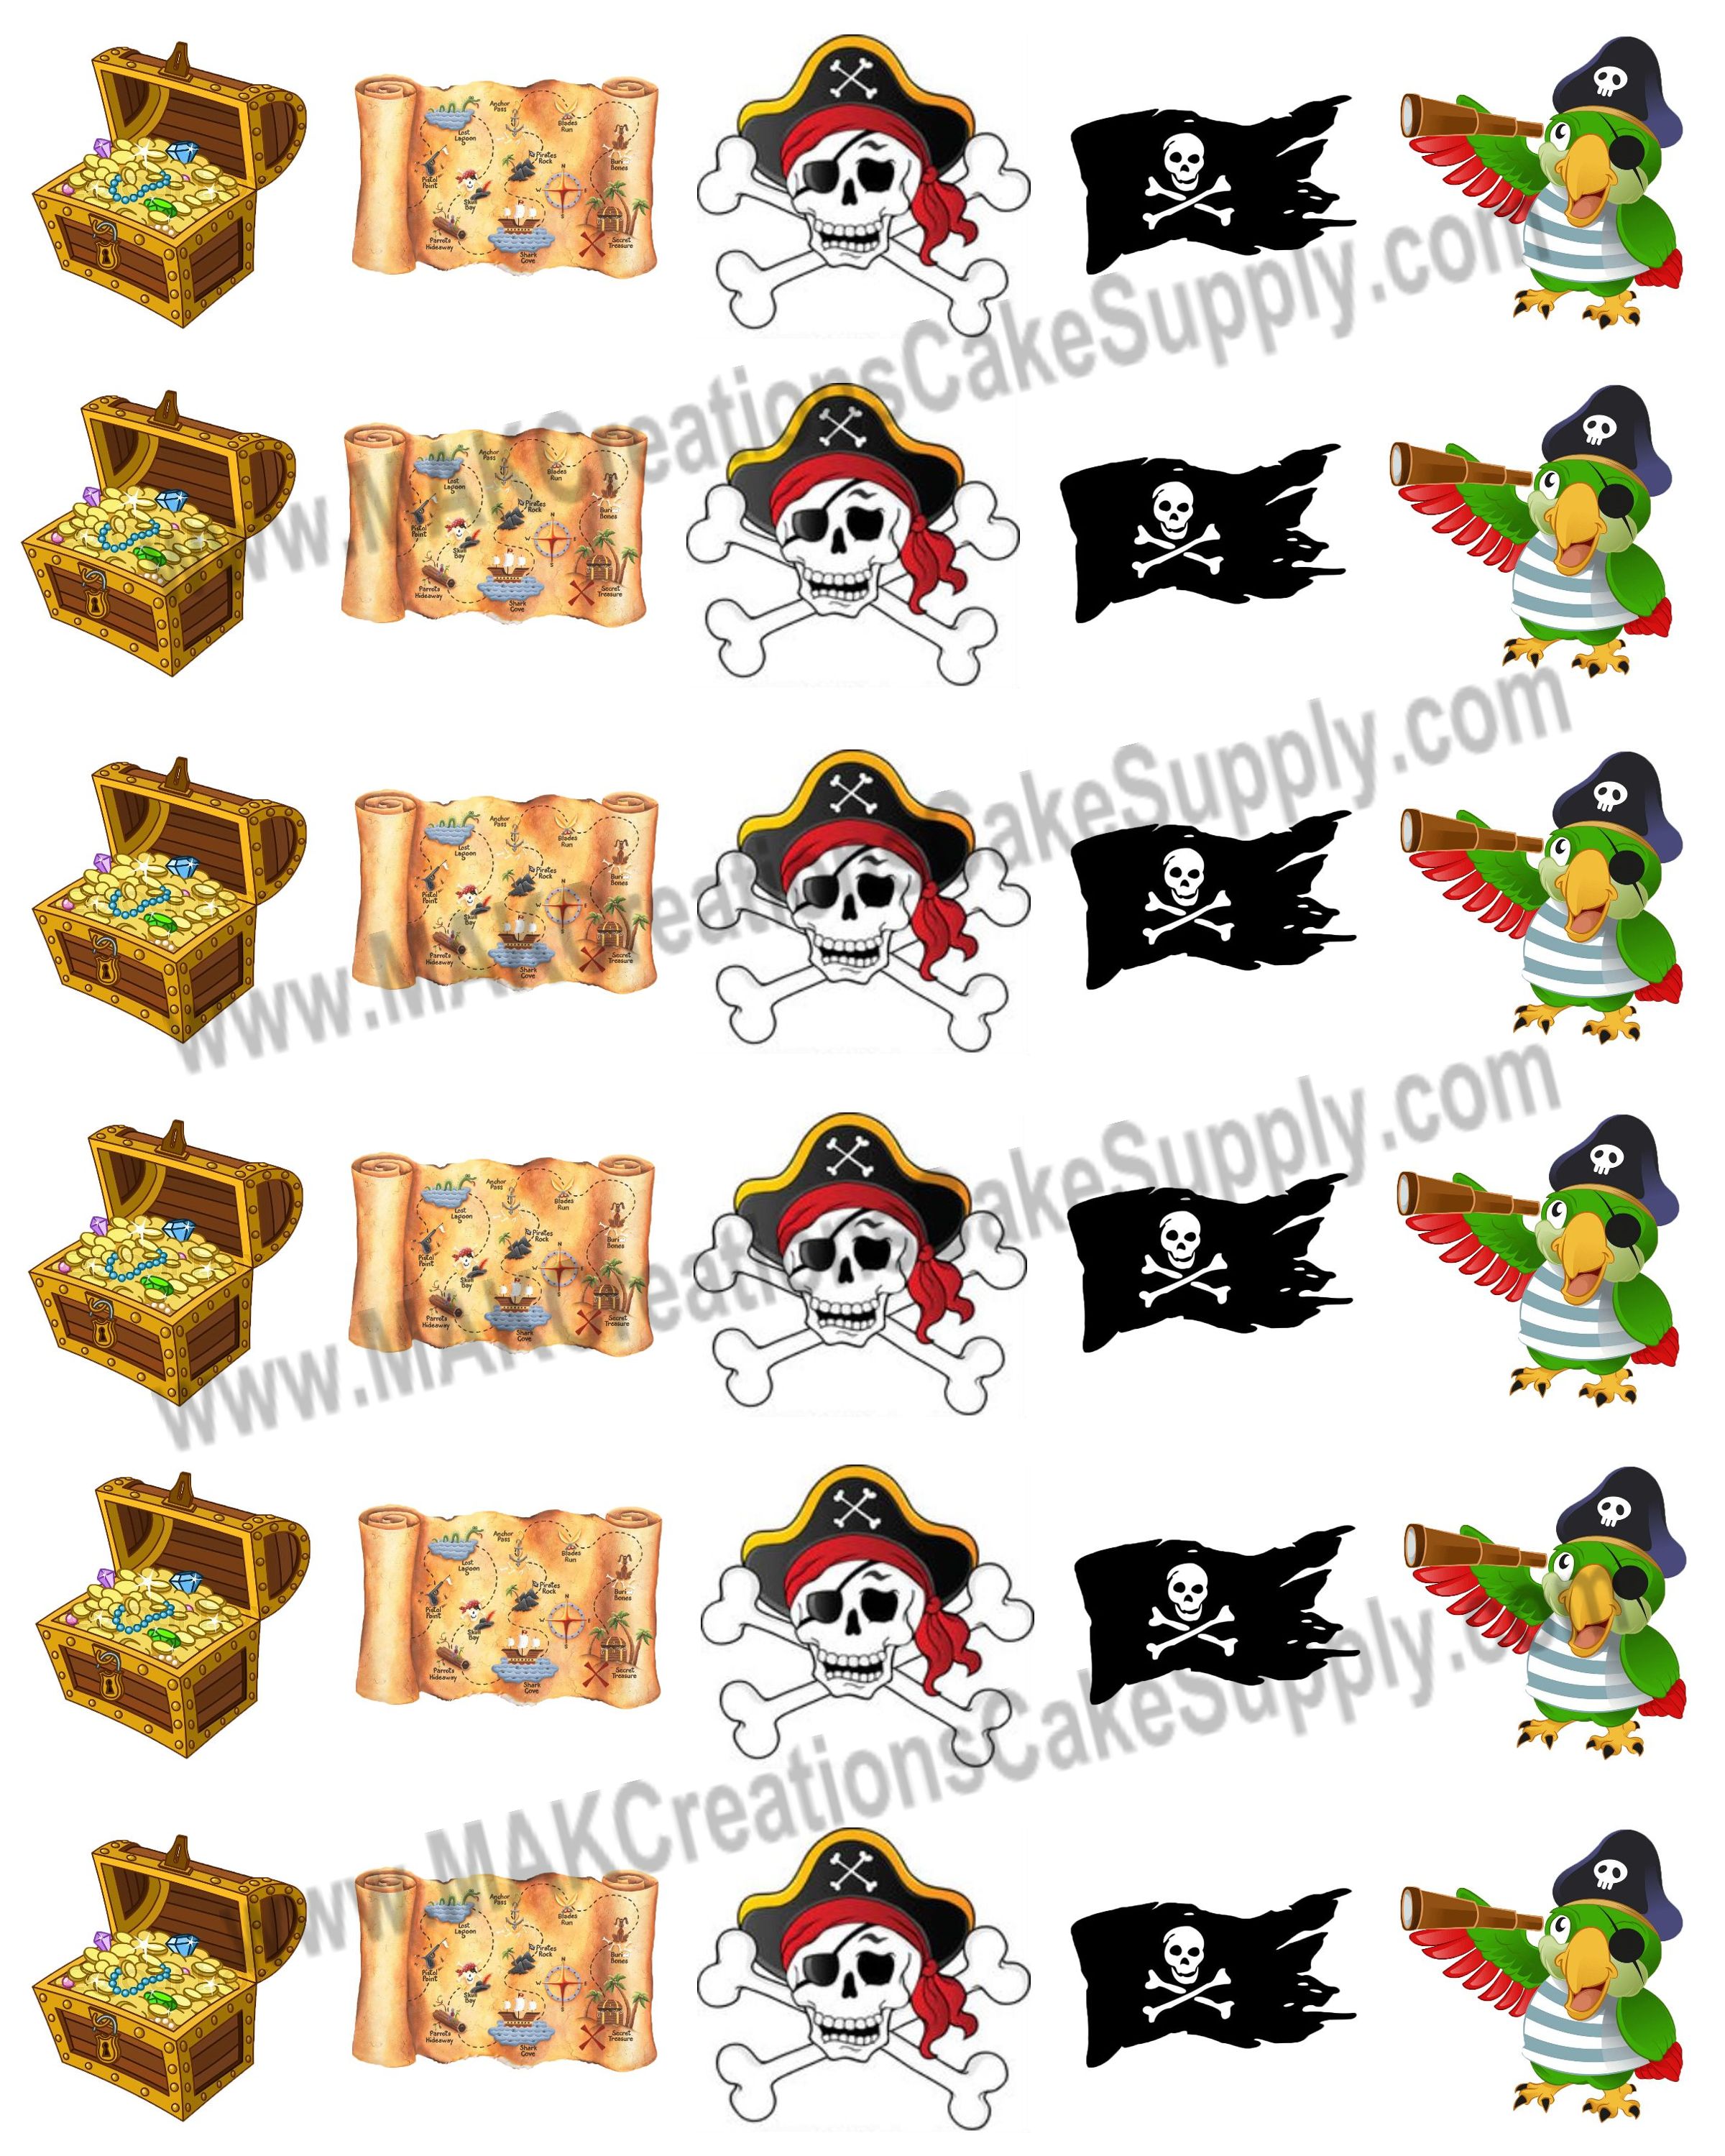 Pirate Cake Stickers, Pirate Theme Party Supply, Pirate Cake, Pirate Map  Cake, Pirate Hat, Pirate Cake, Pirate Hat Cookie, Pirate Hats Cupcakes